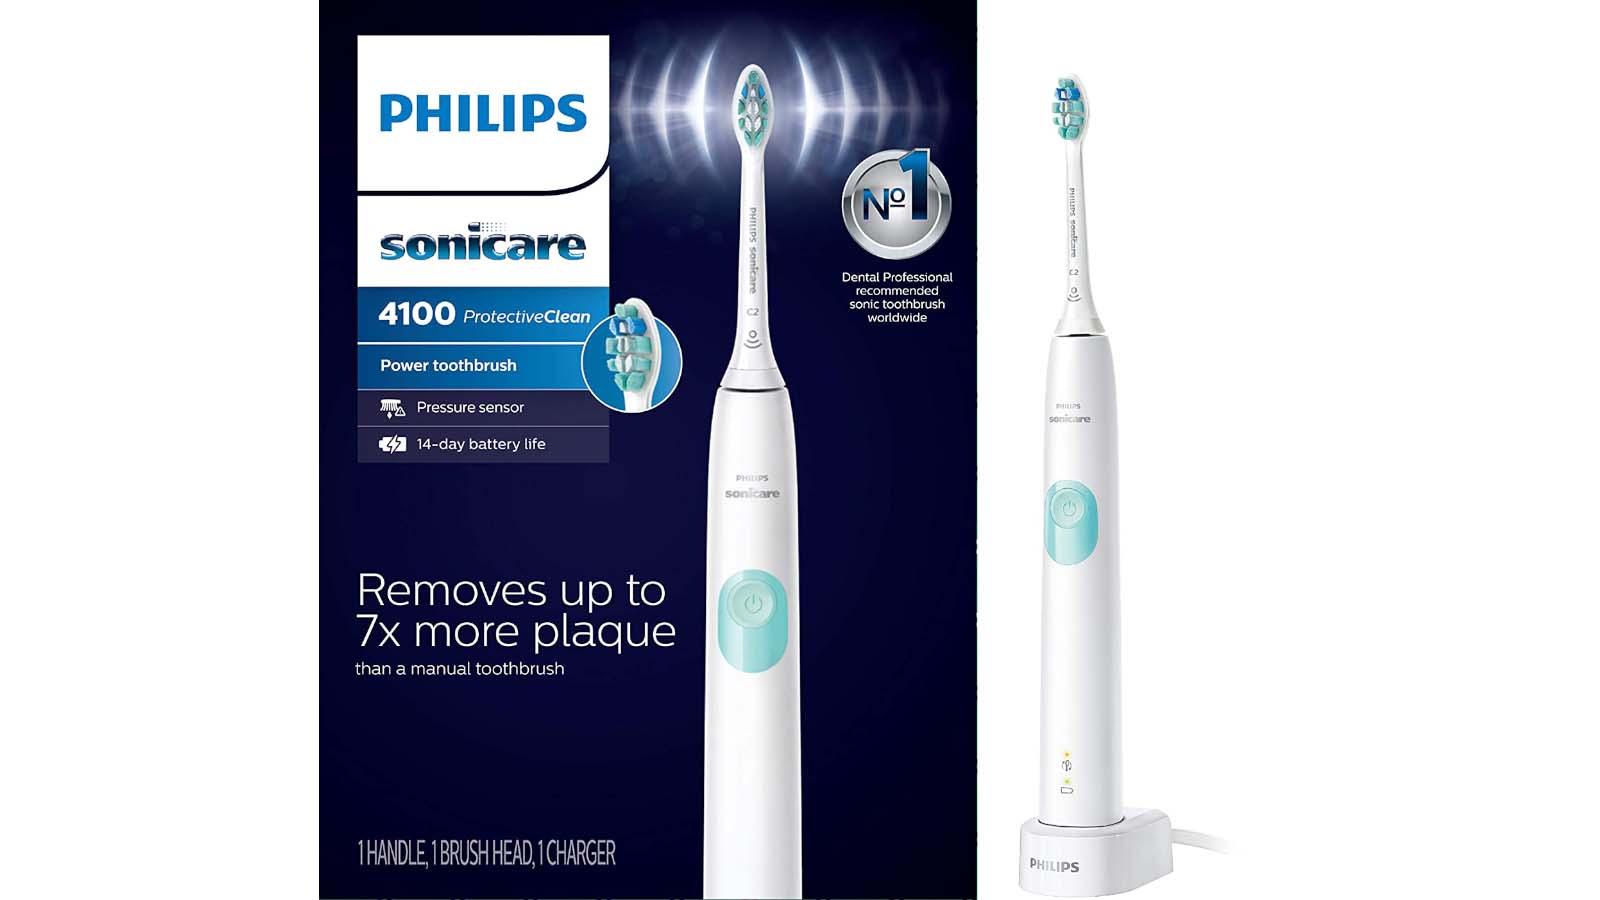 Review of Philips Sonicare 4100 - Philips Sonicare ProtectiveClean 4100 (White, HX6817/01) toothbrush and its packaging